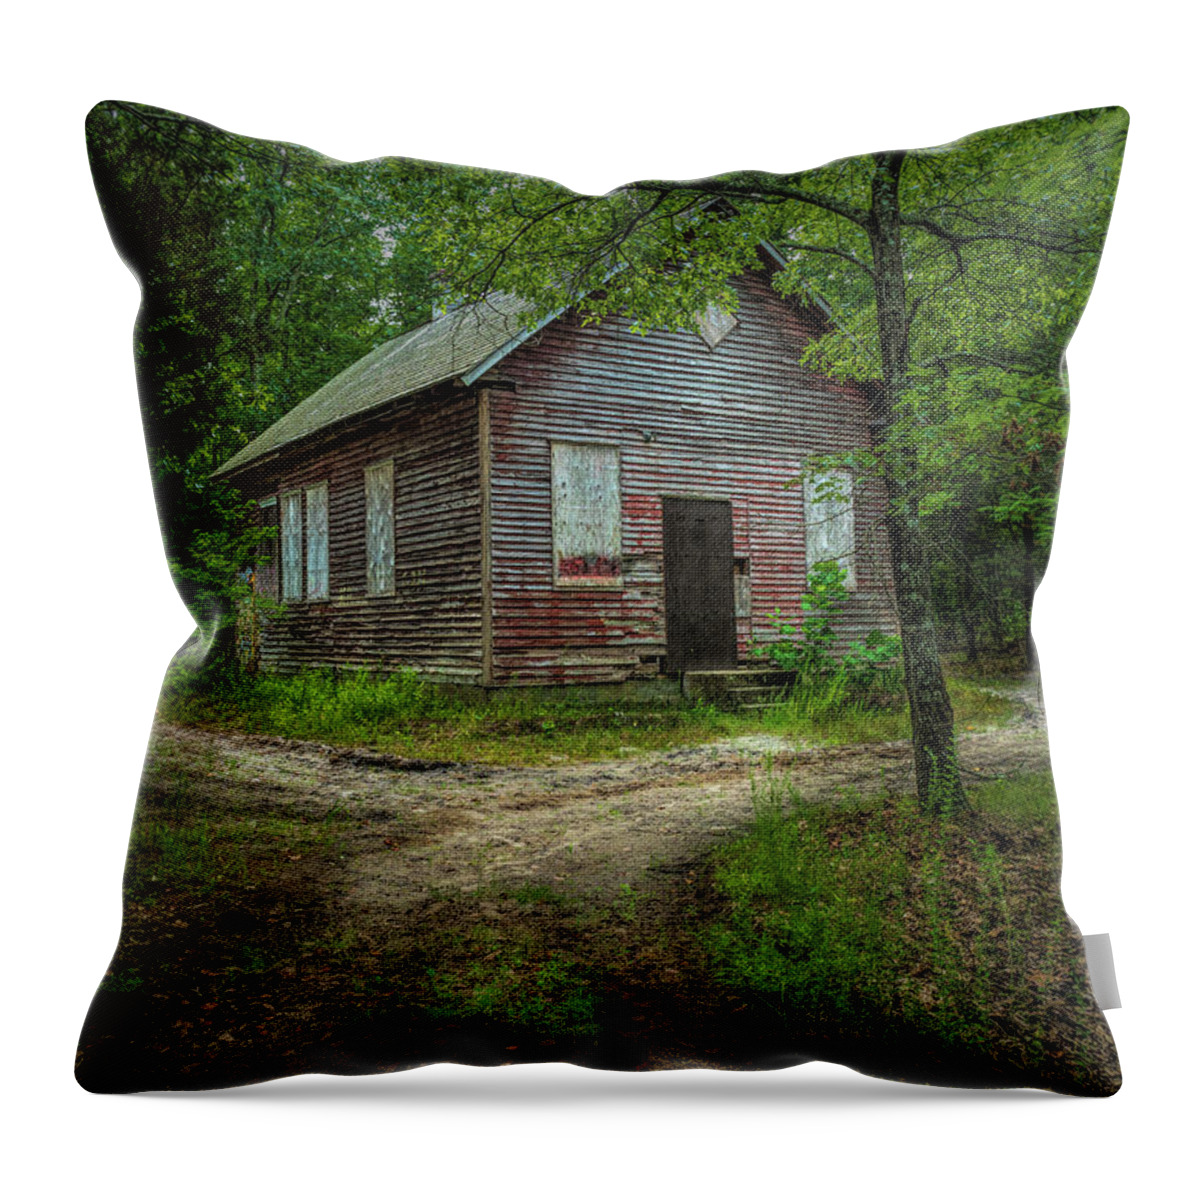 Atsion Throw Pillow featuring the photograph Schoolhouse In The Woods by Kristia Adams